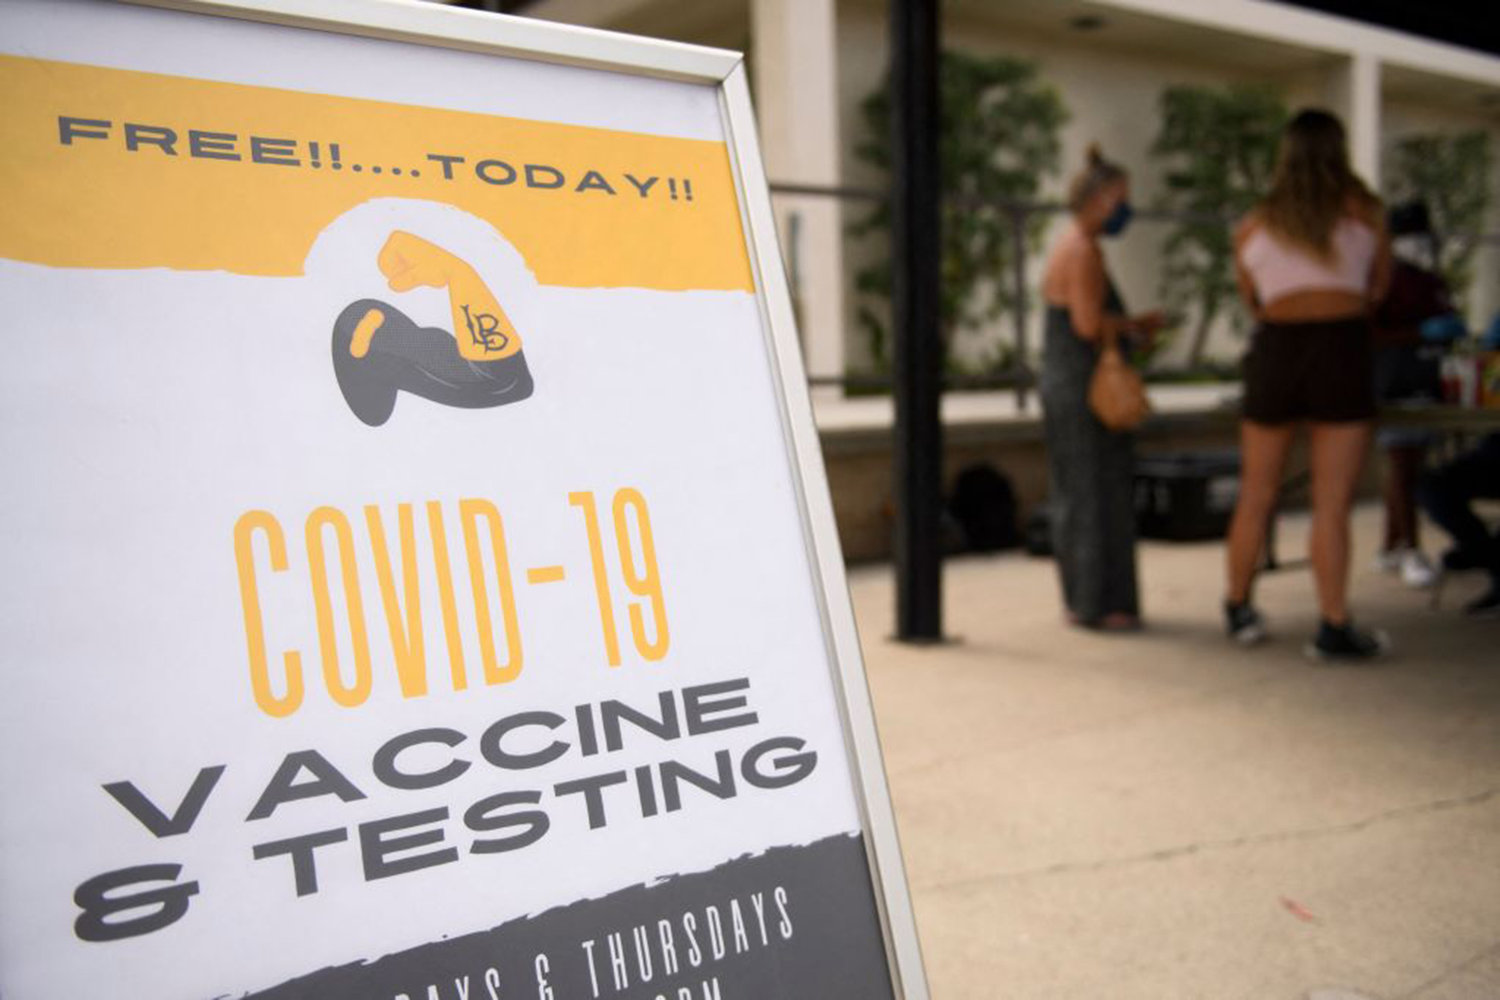 Free COVID-19 vaccine and testing signage is displayed during a City of Long Beach Public Health COVID-19 mobile vaccination clinic at the California State University Long Beach (CSULB) campus on Au. 11, 2021 in Long Beach, California. (Patrick T. Fallon/AFP via Getty Images/TNS)